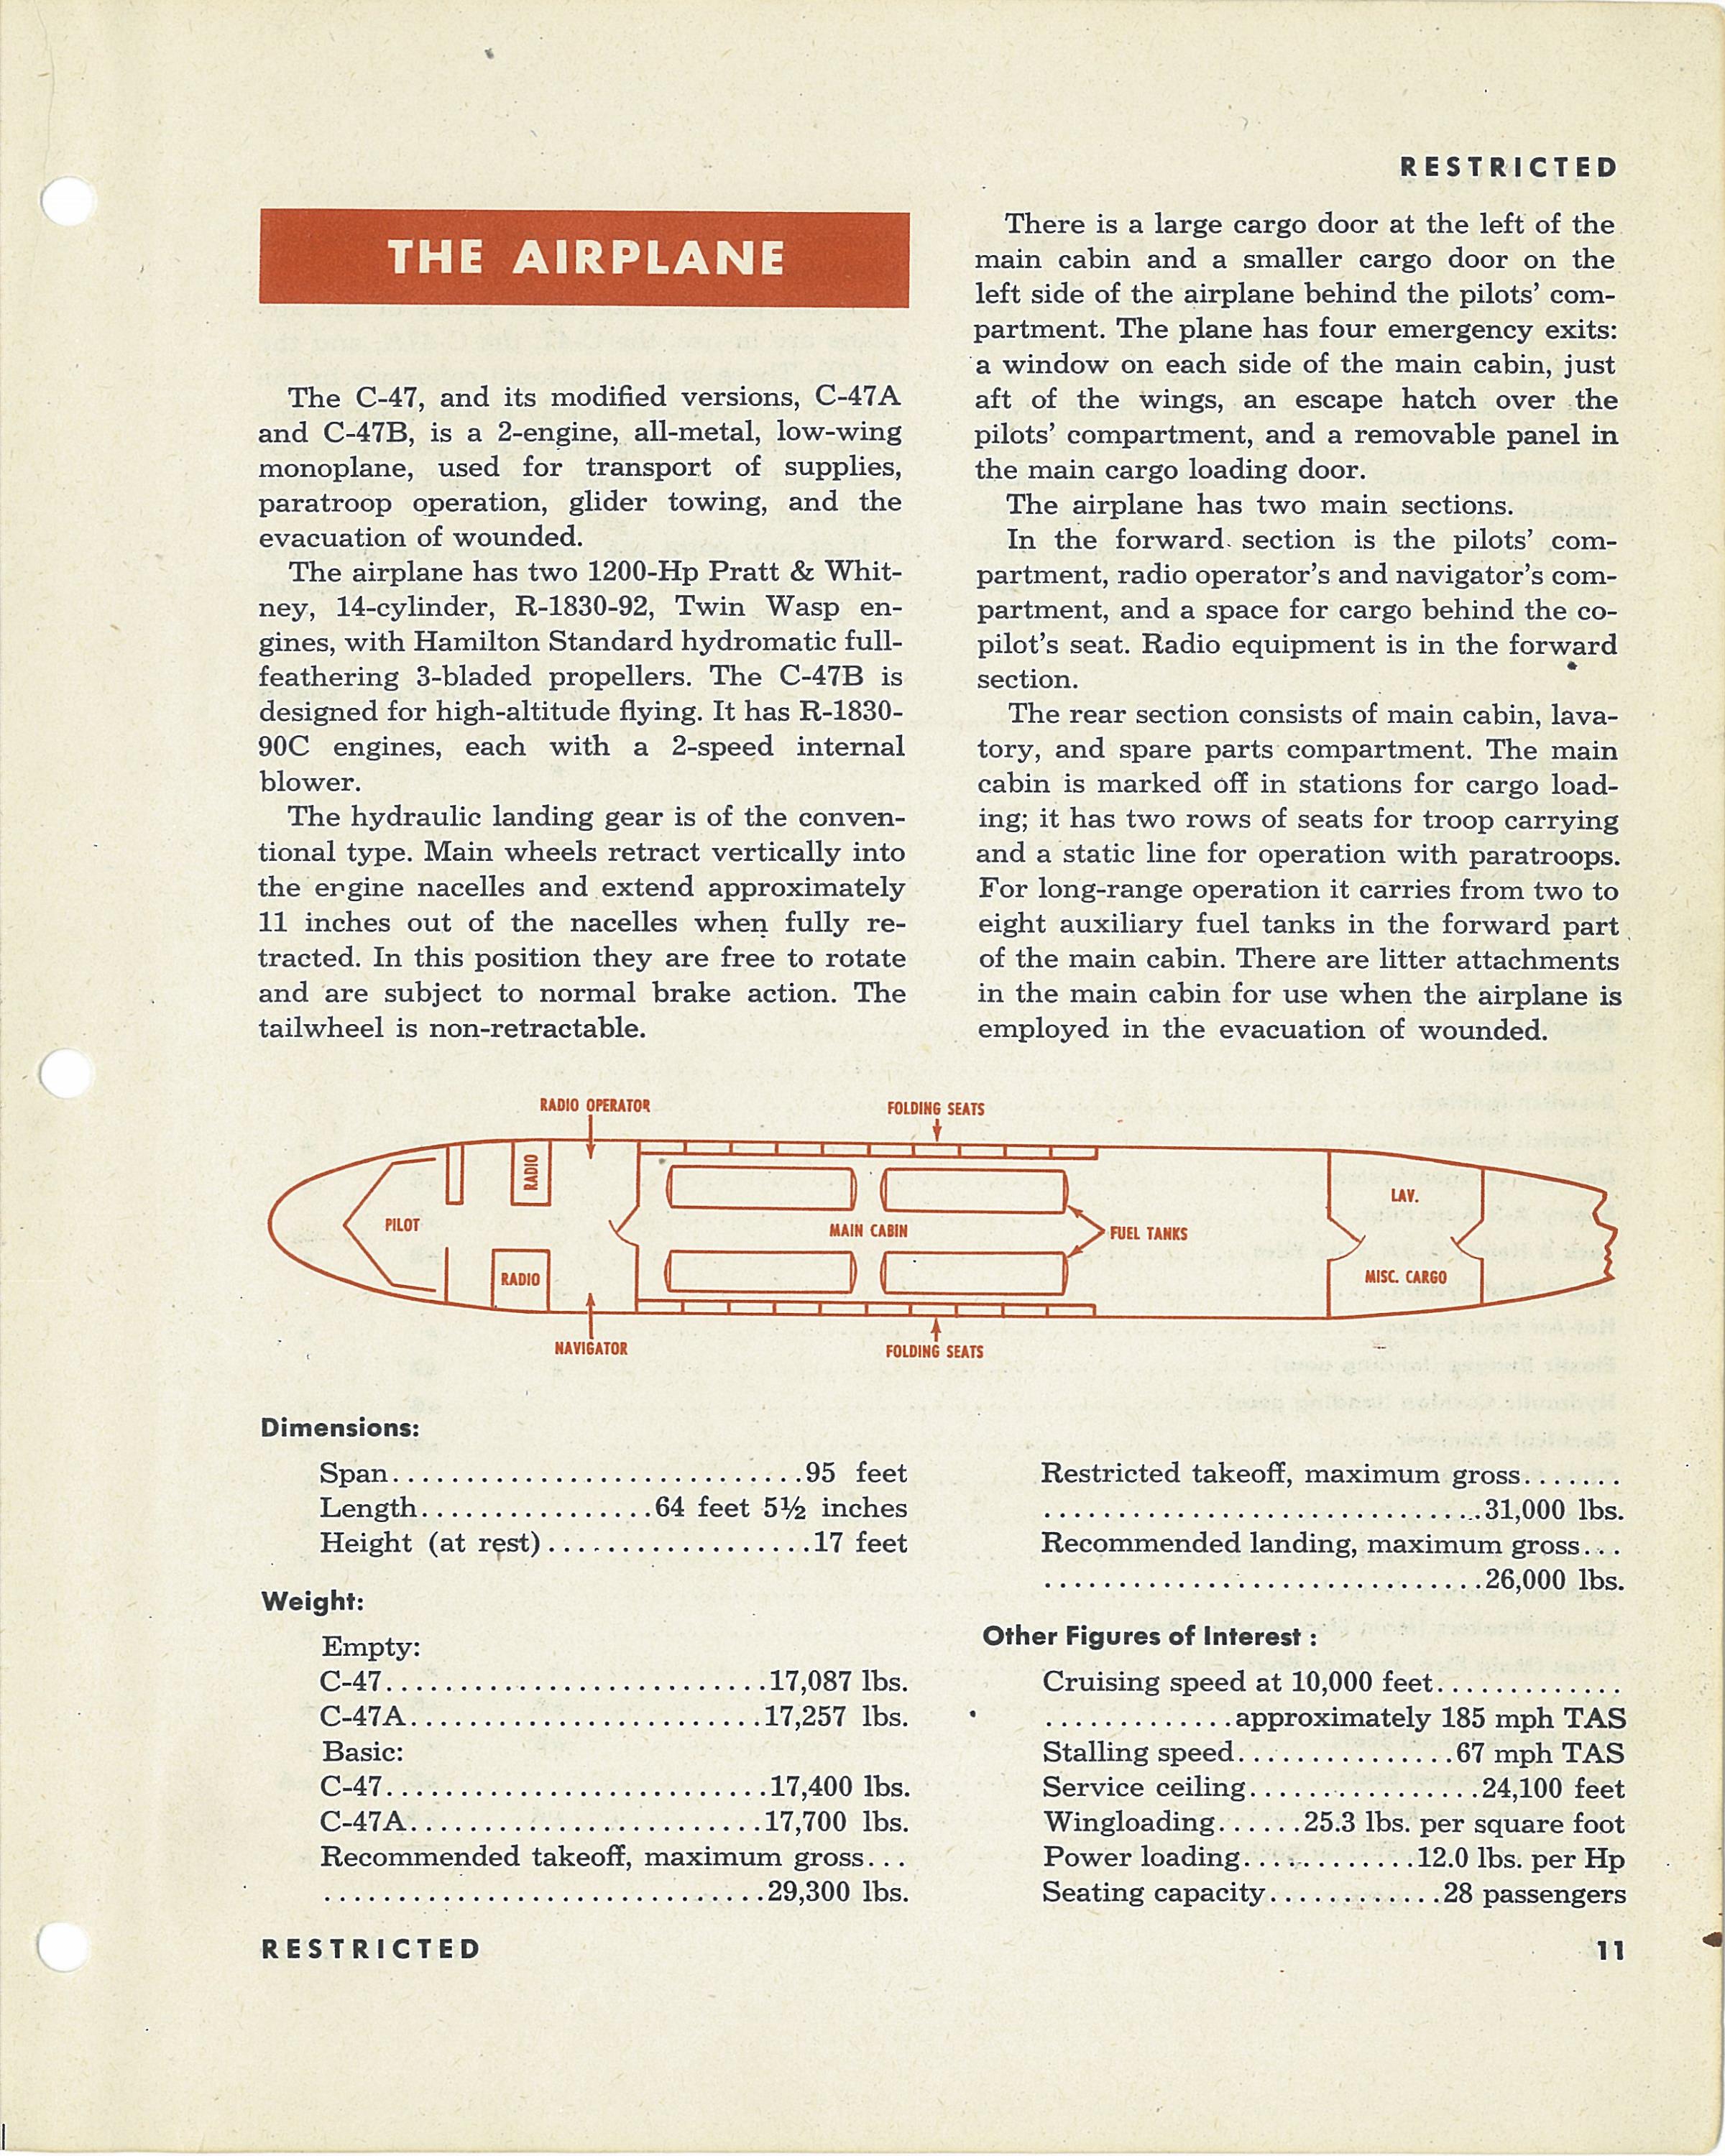 Sample page 13 from AirCorps Library document: Pilot Training Manual for the C-47 Skytrain